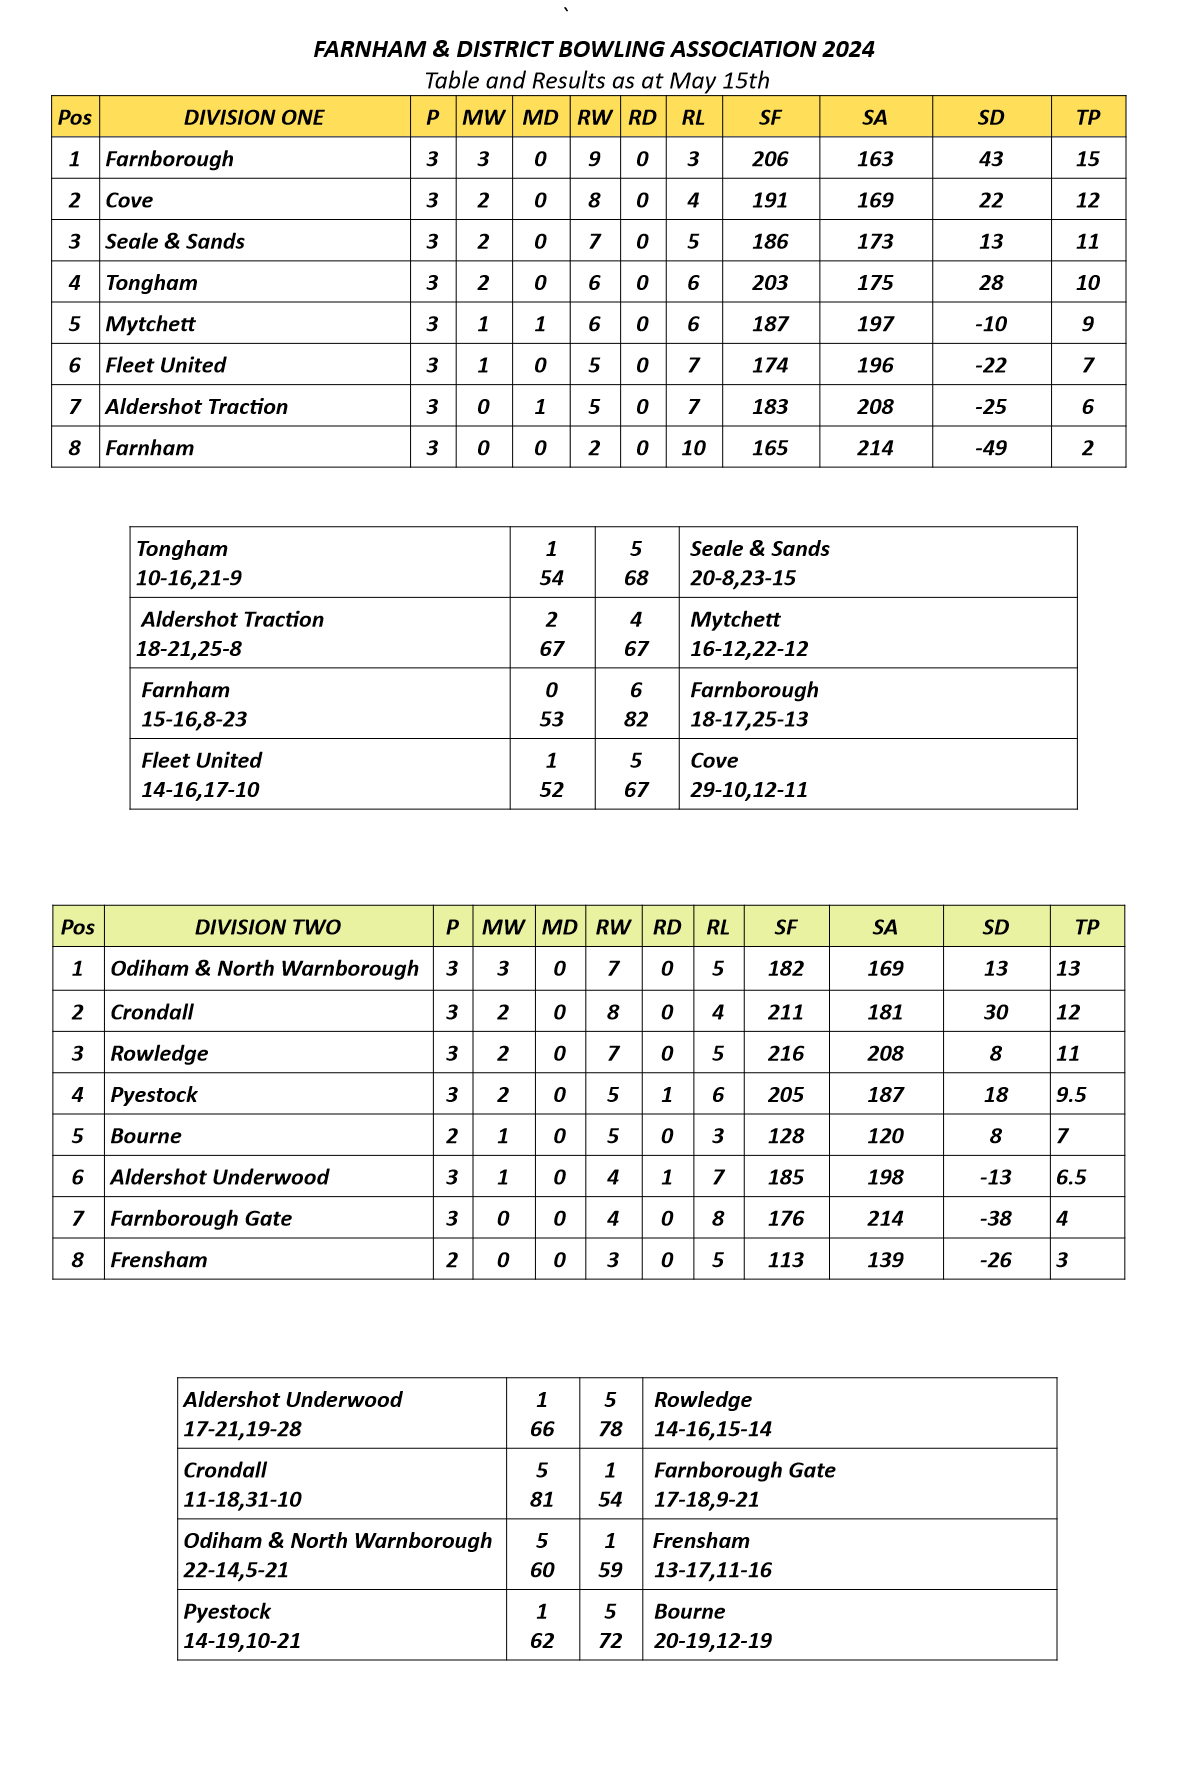  Farnham&District Bowling Association  Tables & Results as at May 15th